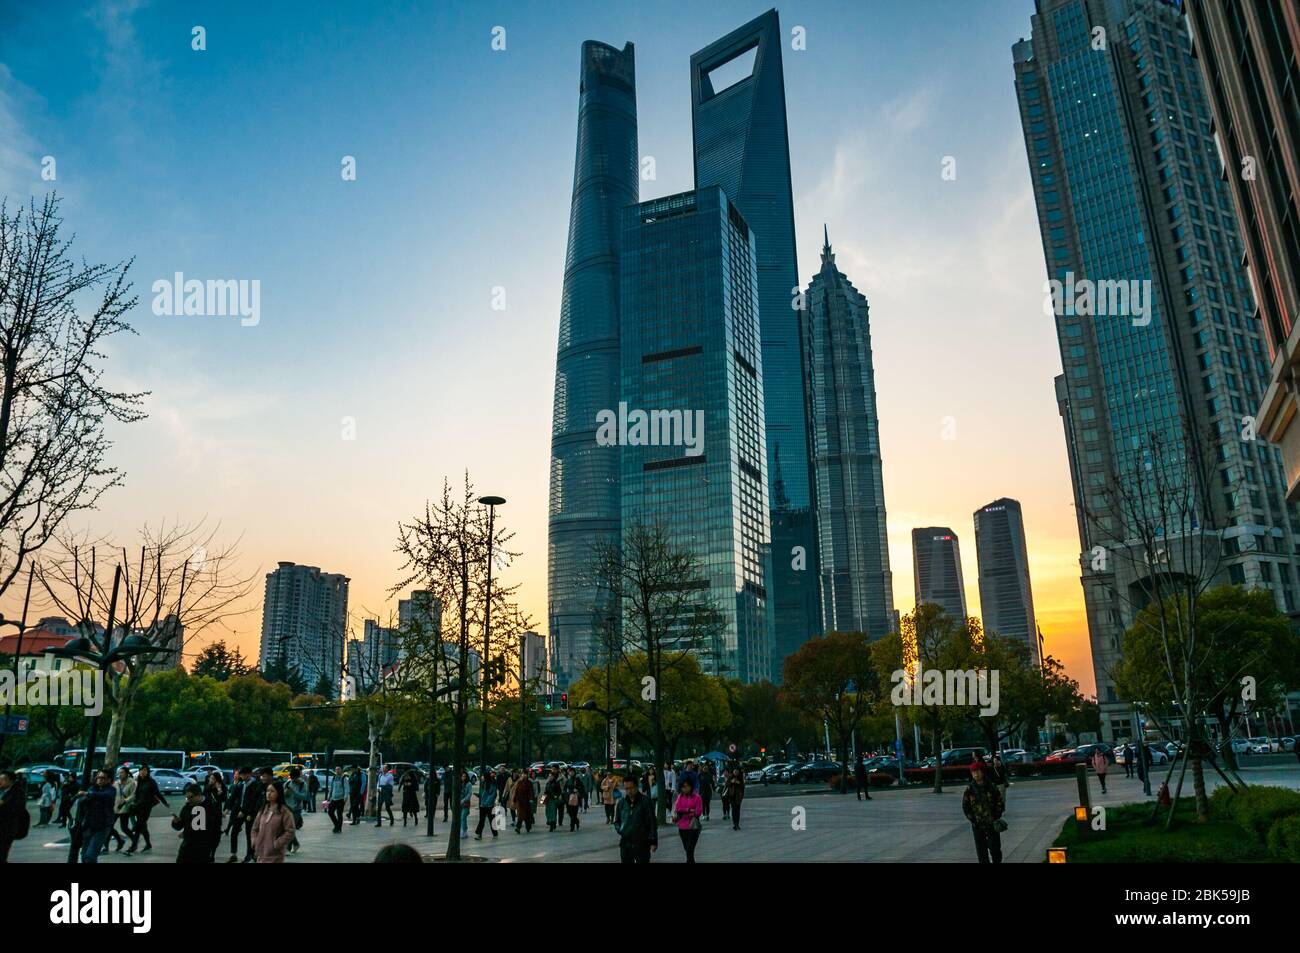 The Shanghai Tower, Jinmao Tower and Shanghai World Financial Center skyscrapers seen at sunset from around Dongchang Road subway station. Stock Photo